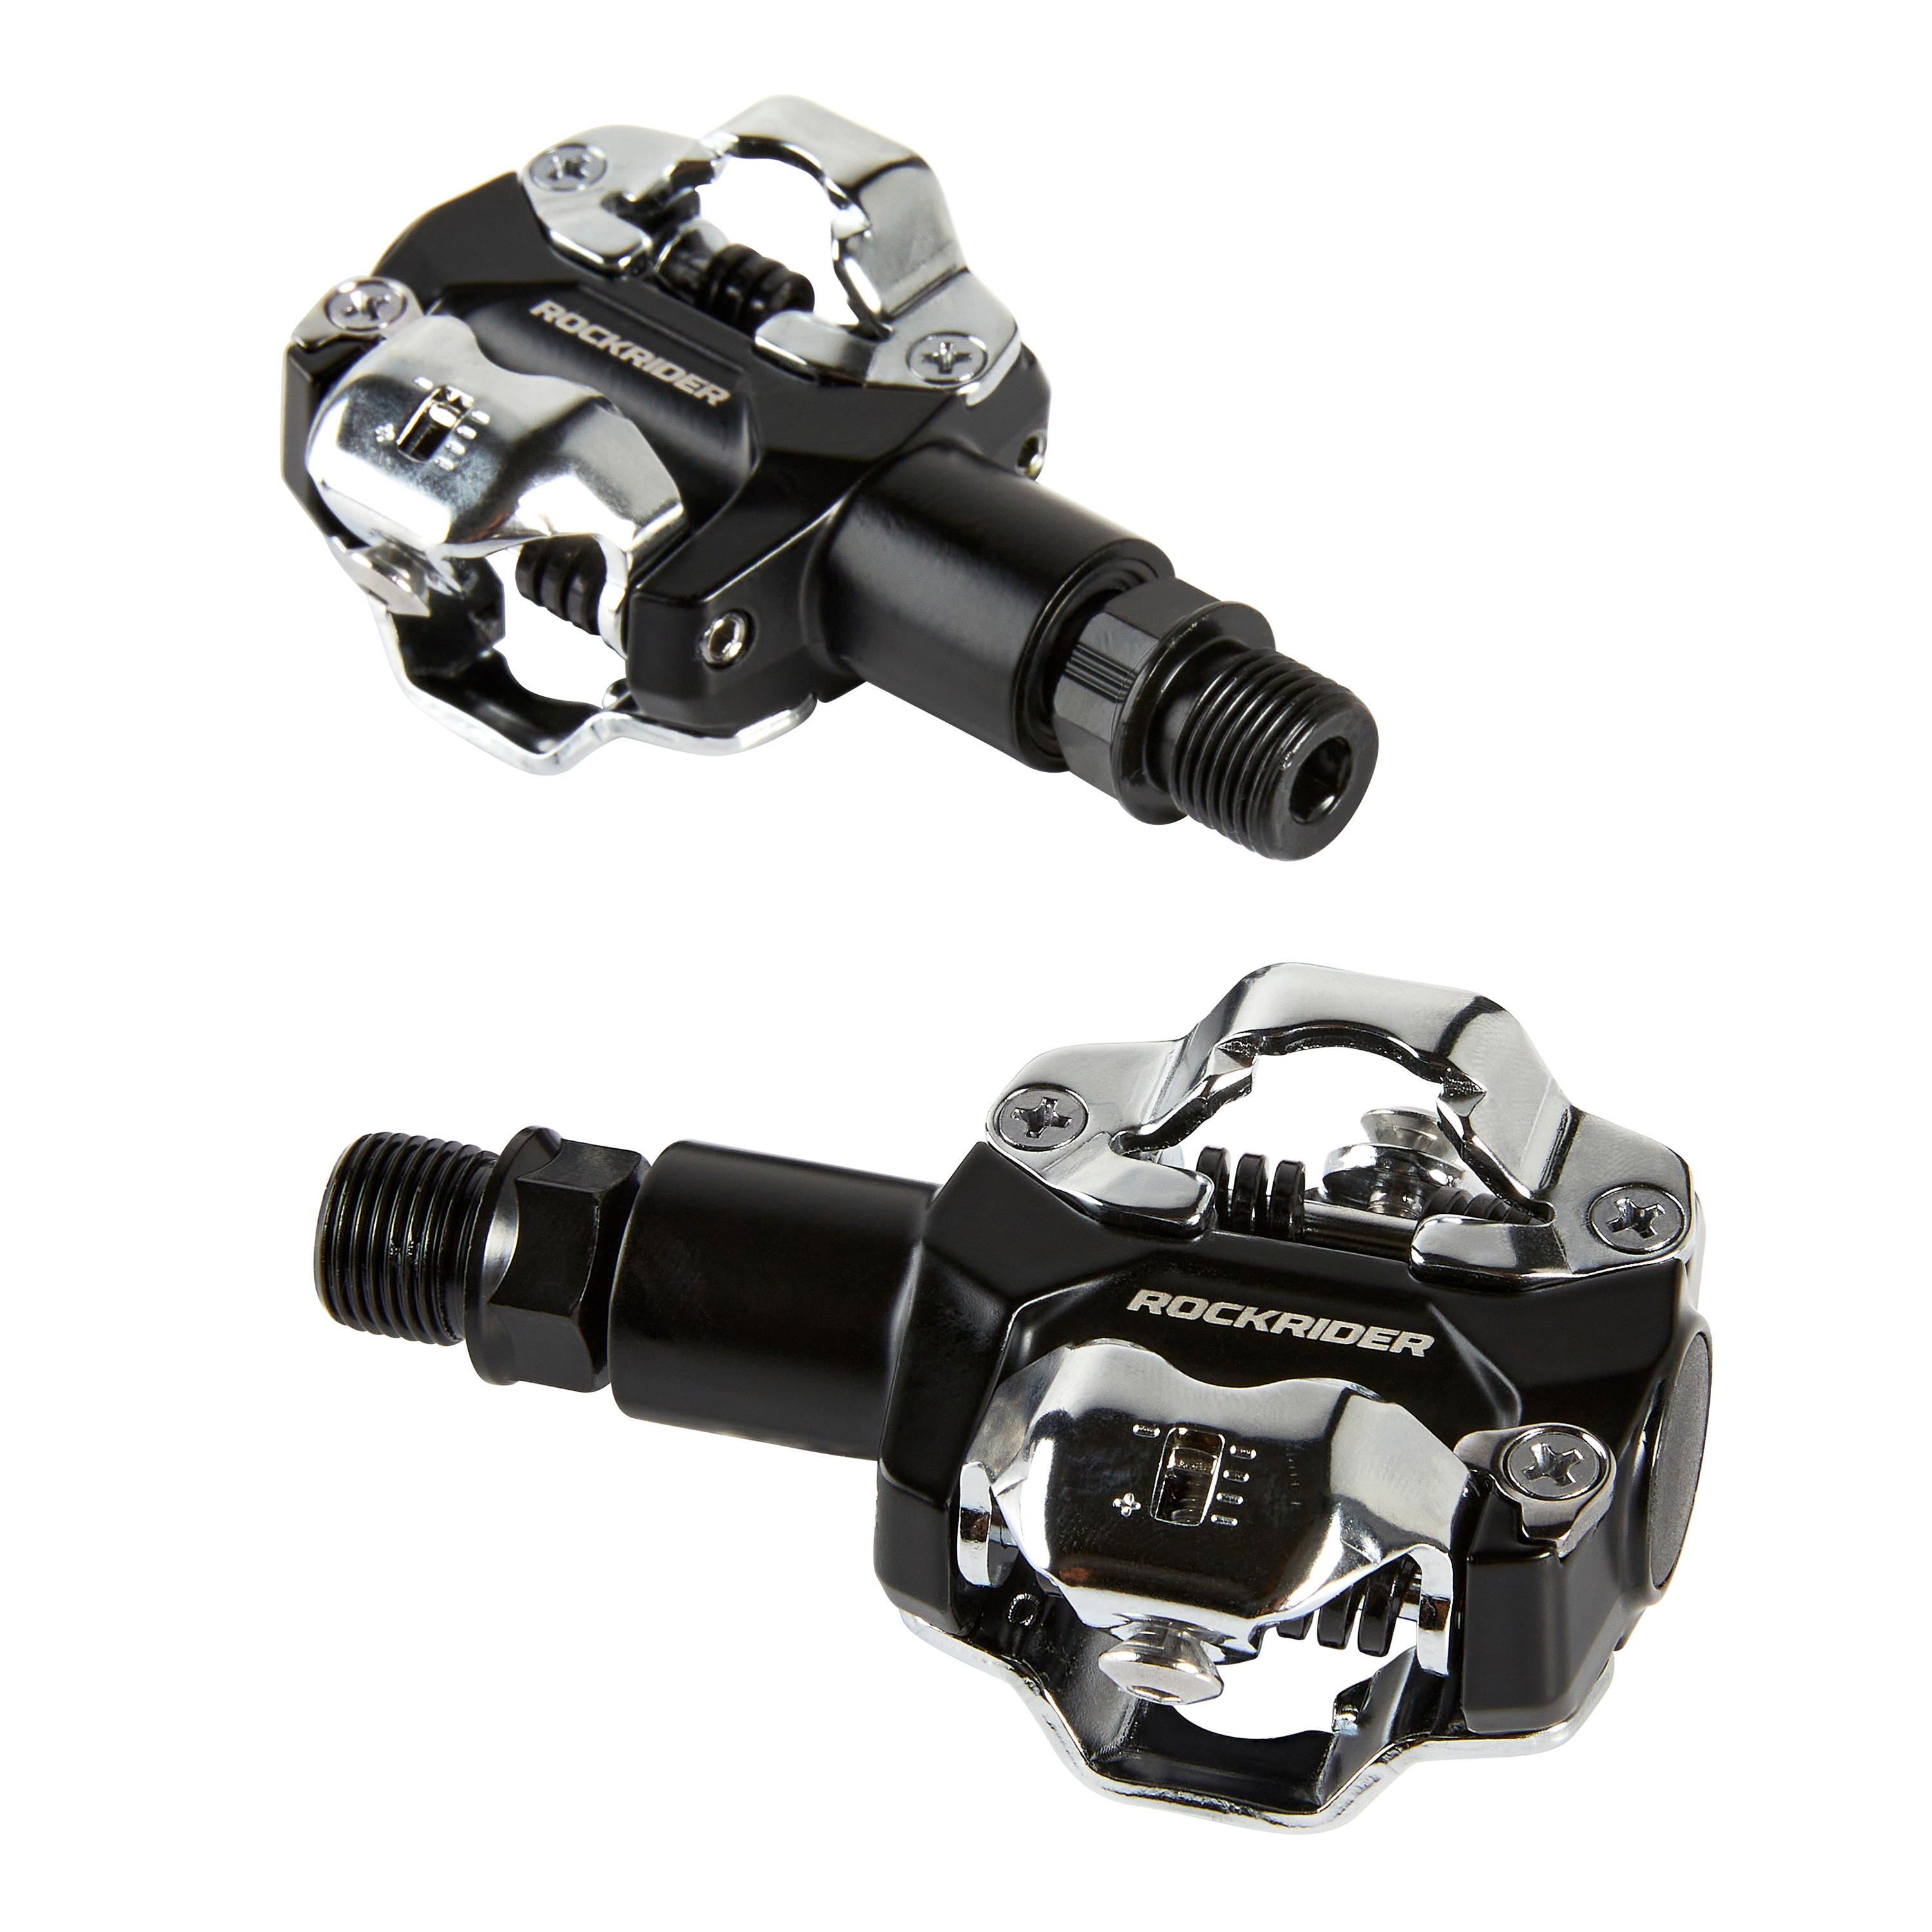 switching to clipless pedals